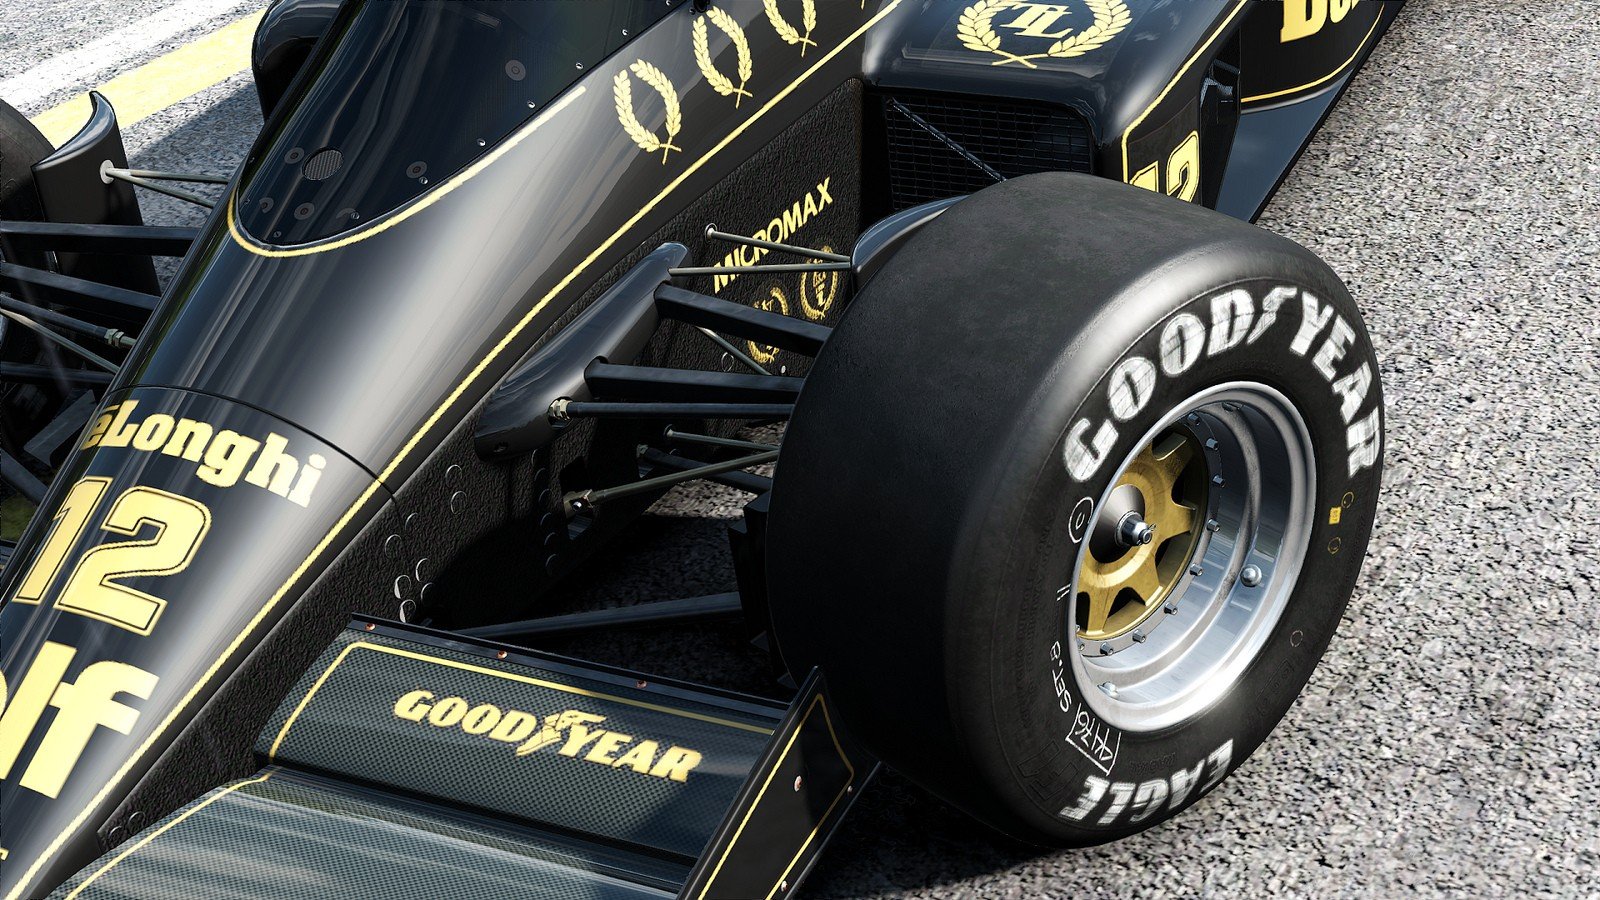 video, Games, Cars, Formula, One, Lotus, Goodyear, Project, C, A, R Wallpaper